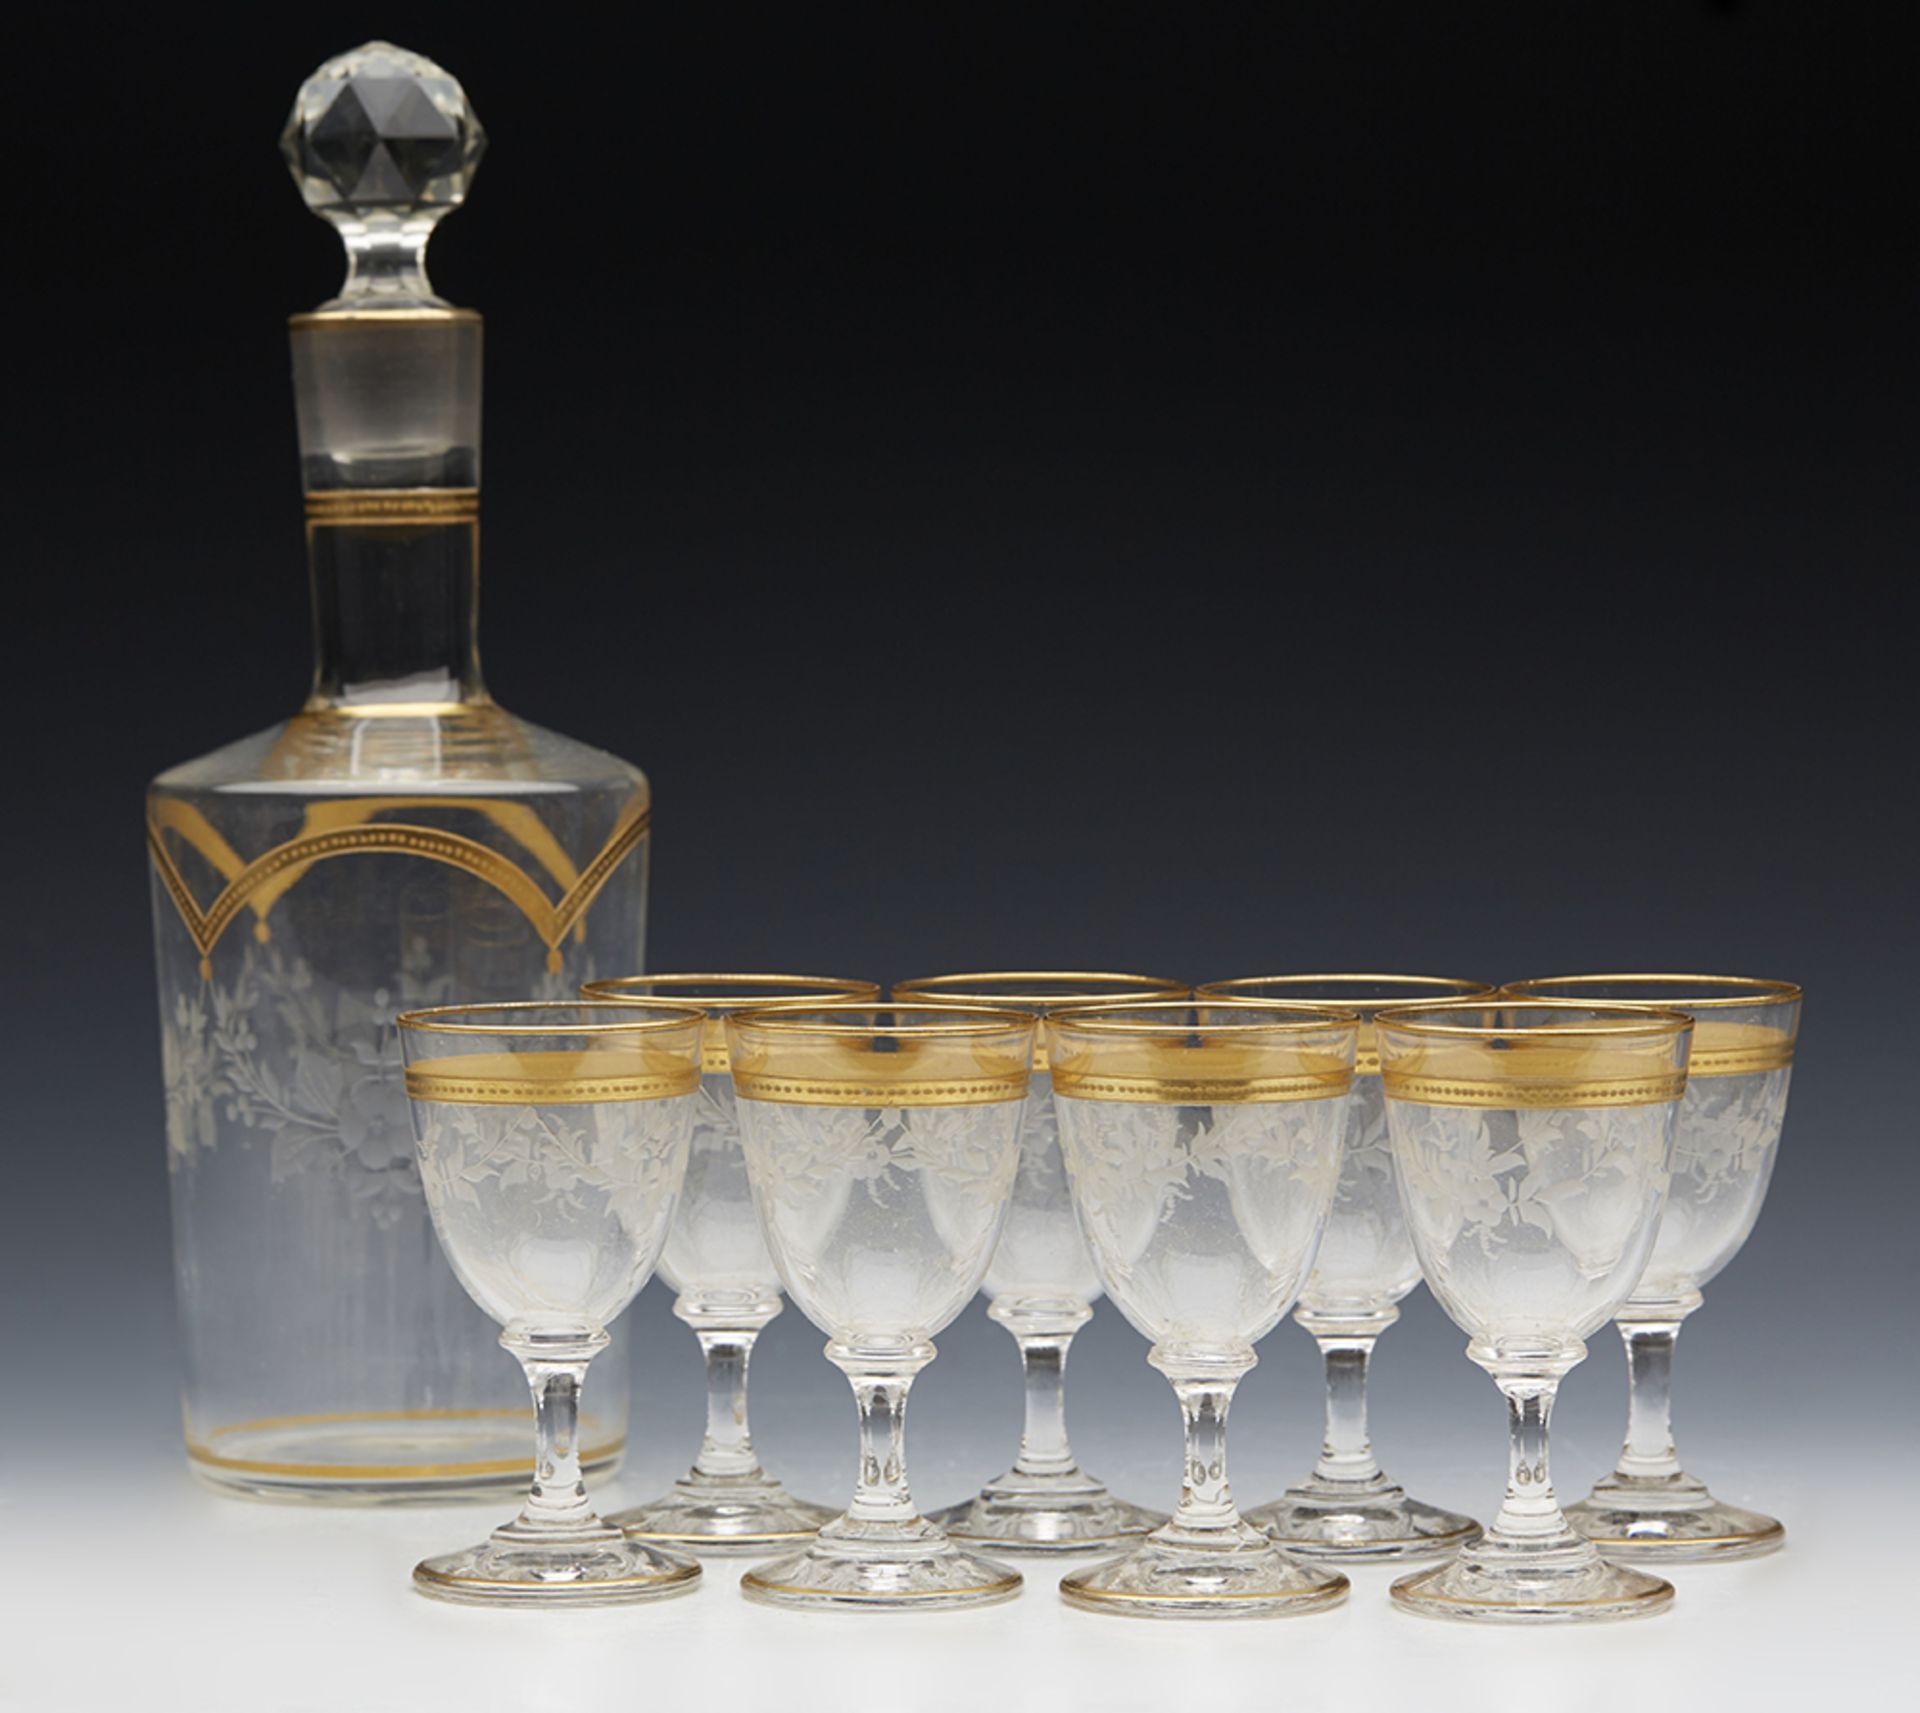 ANTIQUE ENGRAVED & GILDED LIQUEUR SET WITH GLASSES 19TH C. - Image 10 of 11